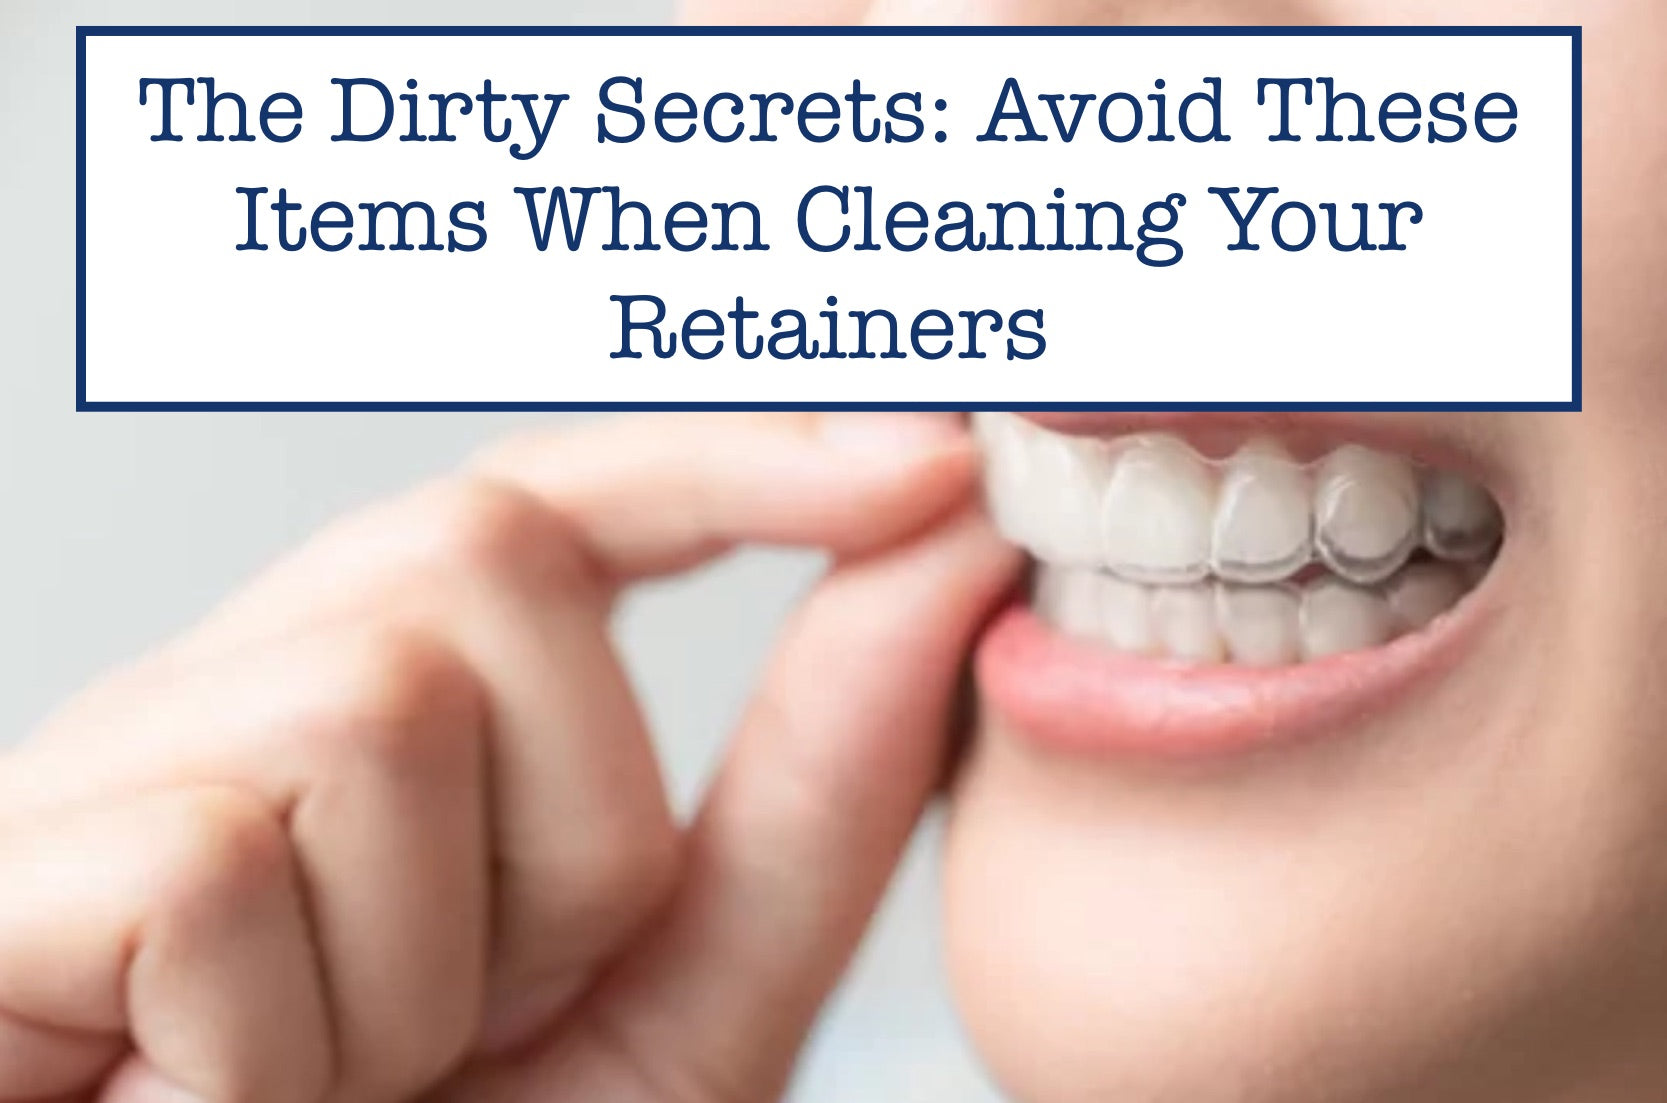 The Dirty Secrets: Avoid These Items When Cleaning Your Retainers